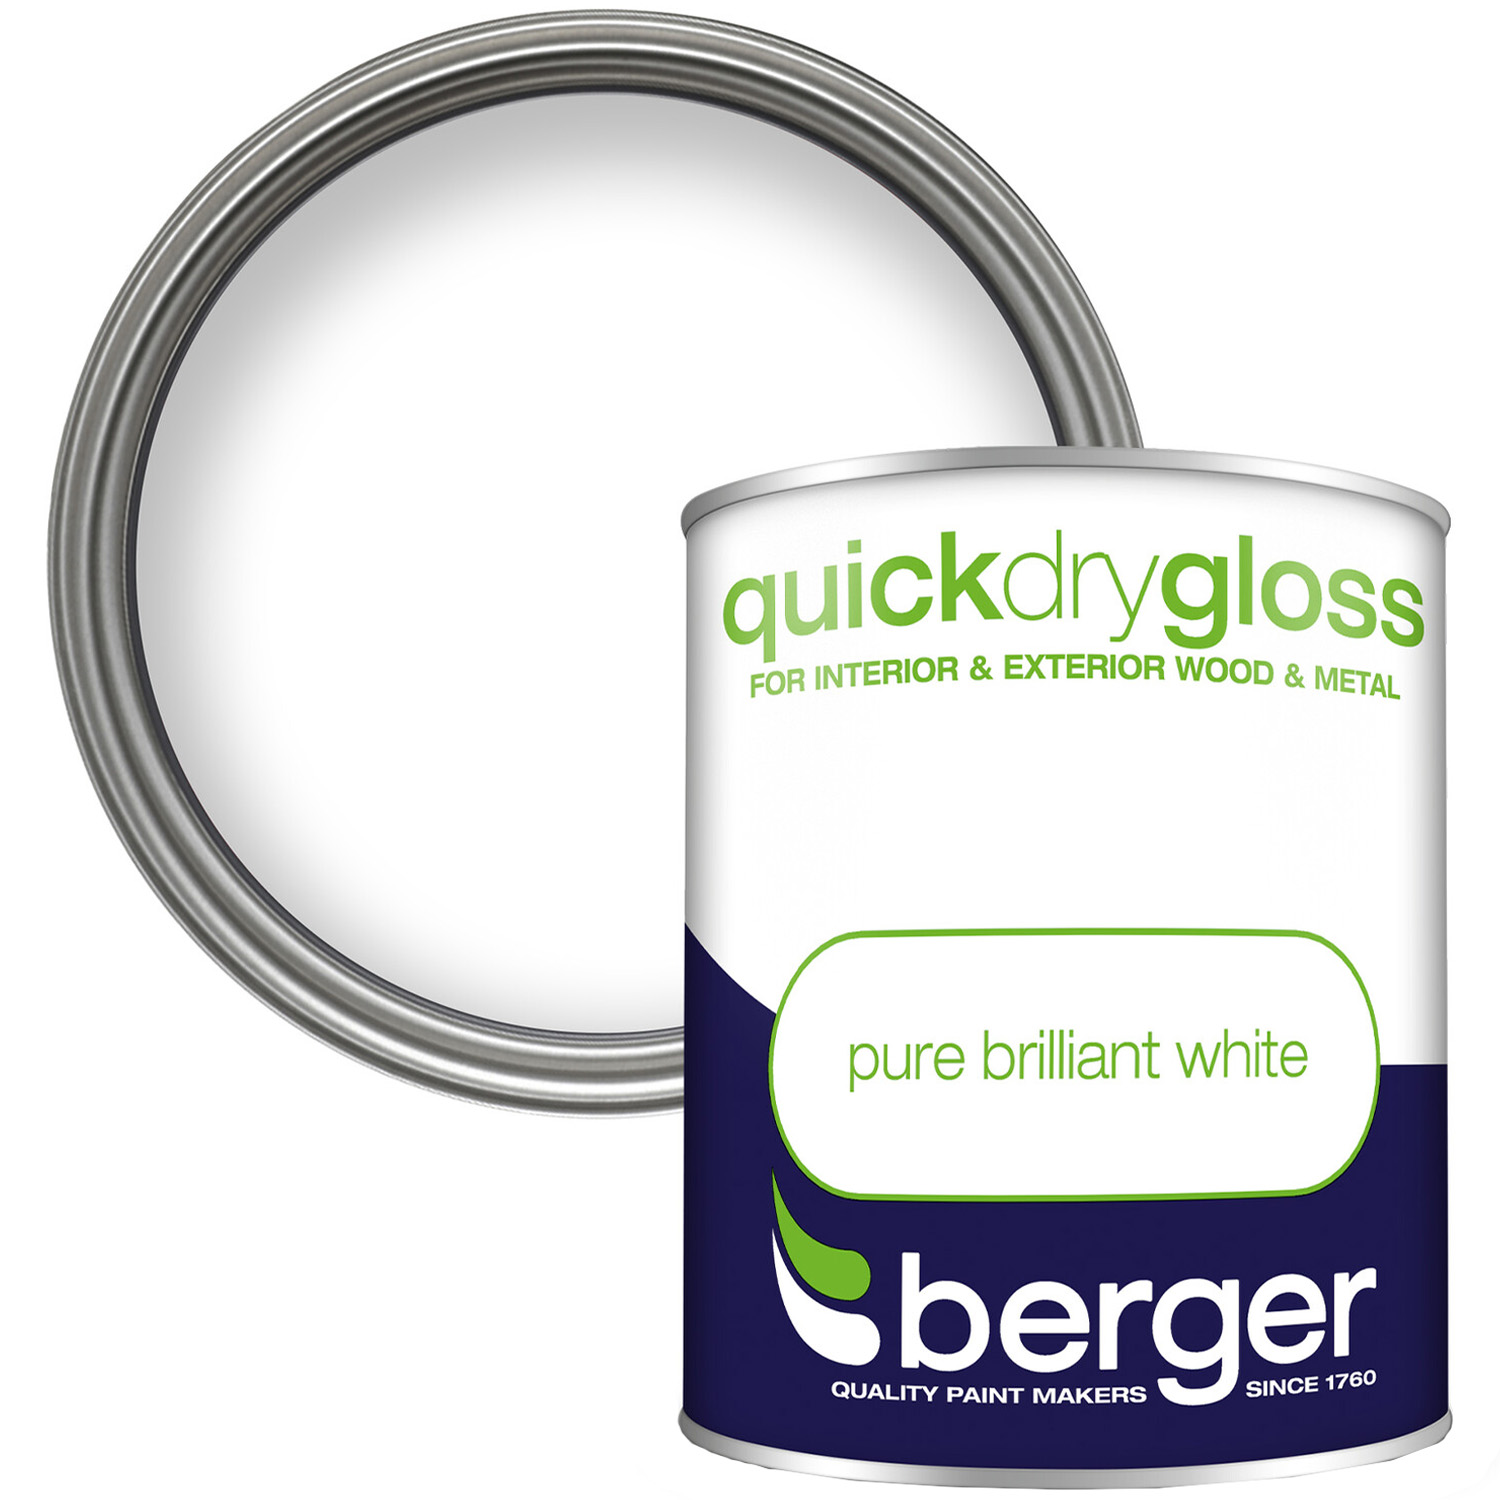 Berger Wood and Metal Pure Brilliant White Quick Dry Gloss Paint 750ml Image 1